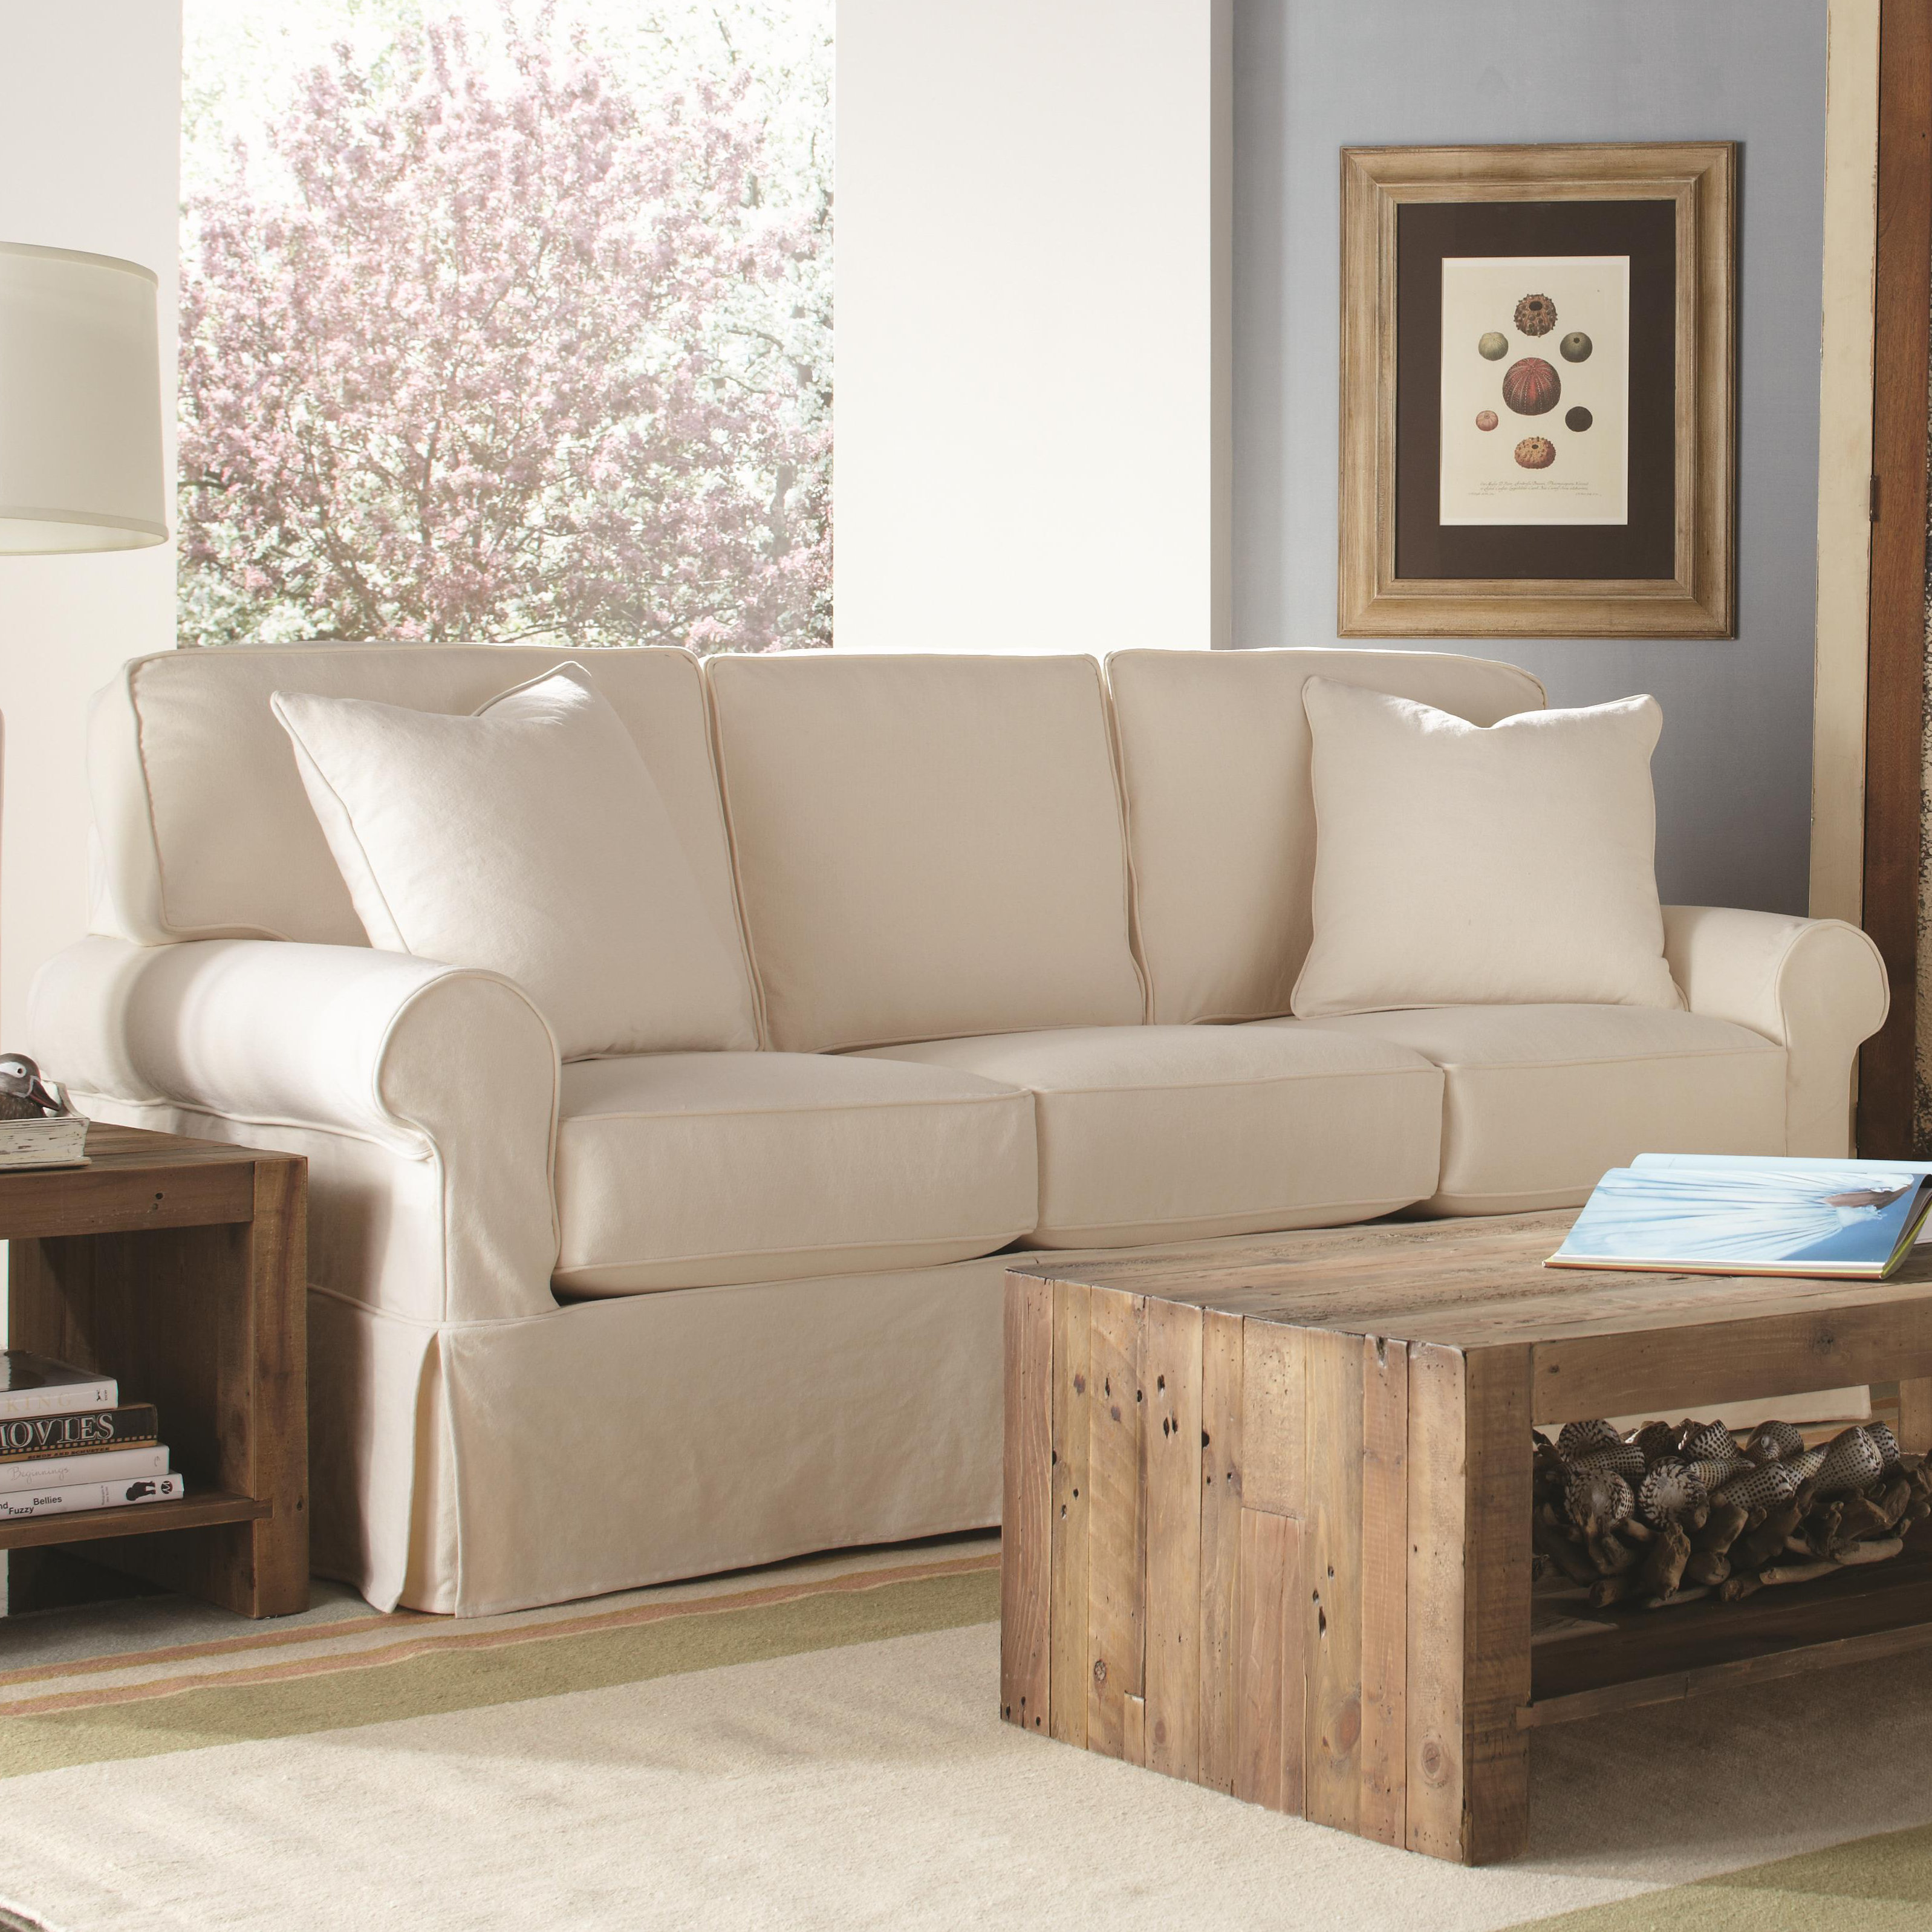 Natural white sofa with slipcover